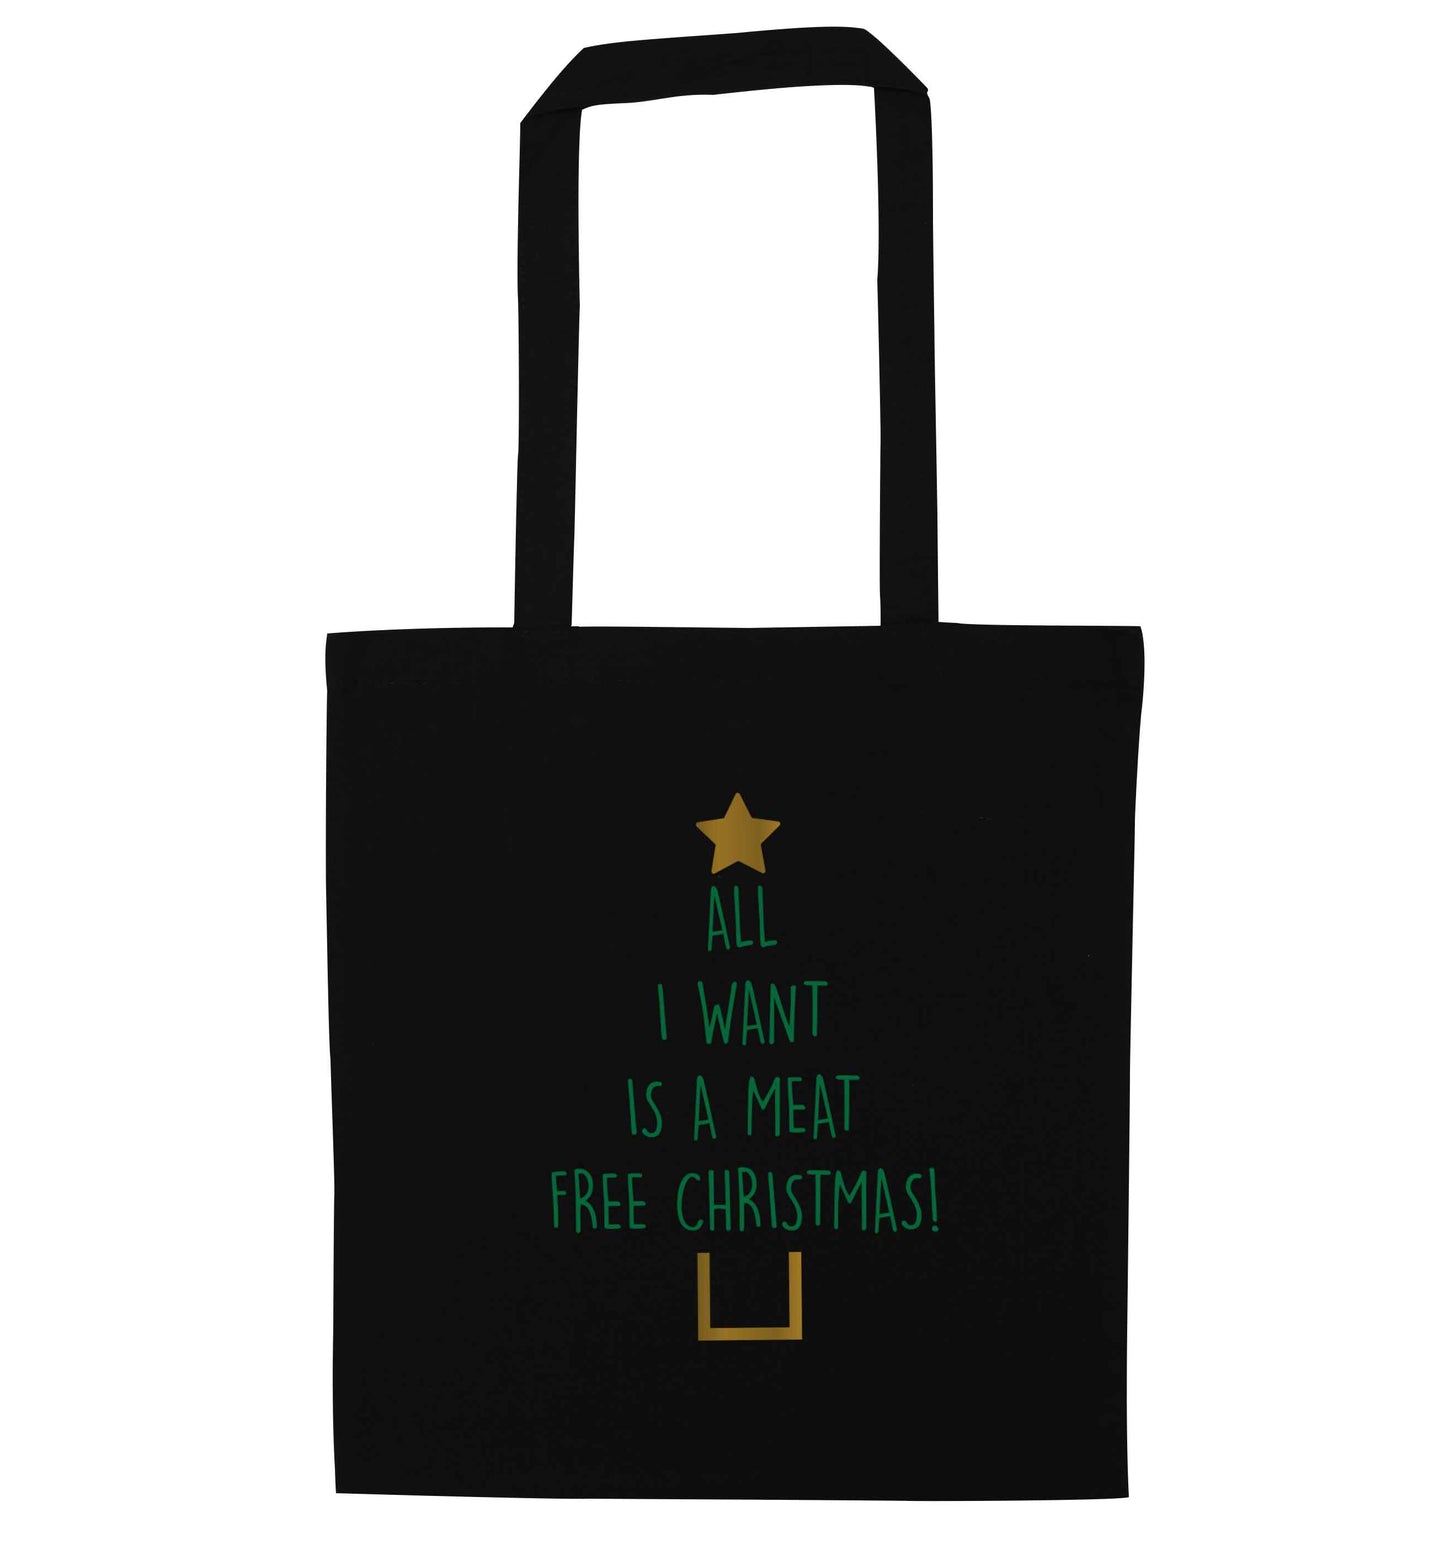 All I want is a meat free Christmas black tote bag